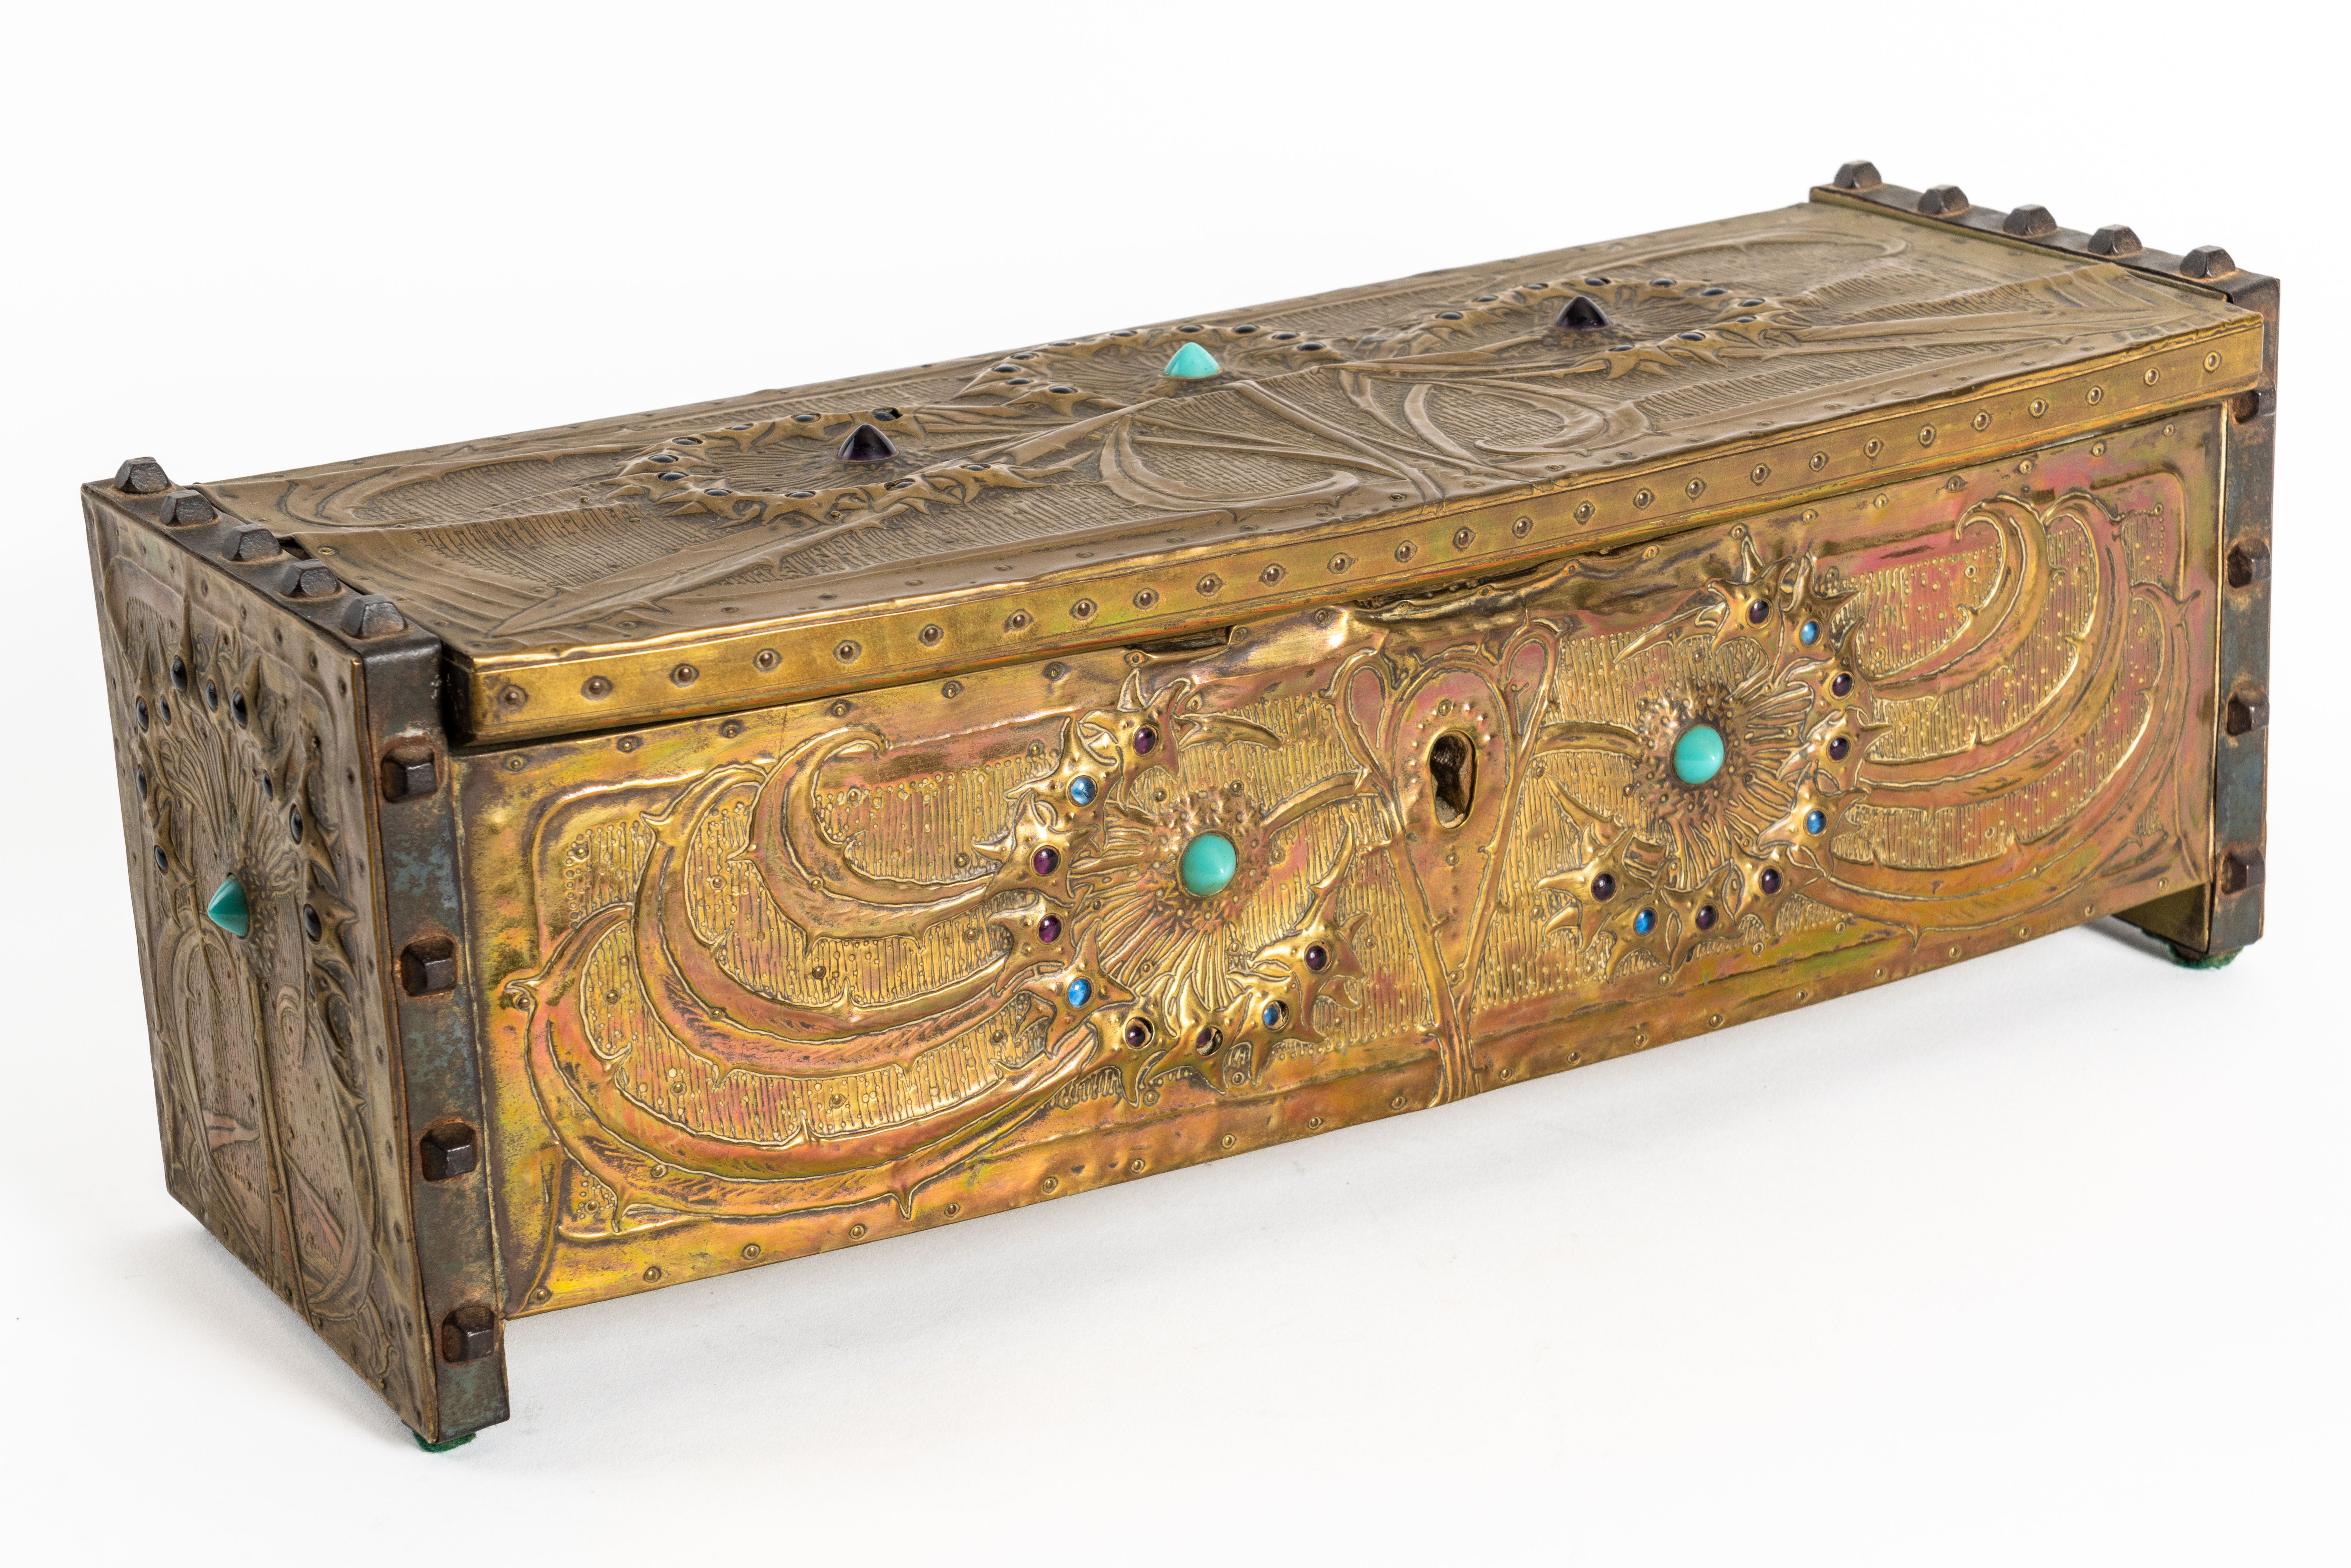 ALFRED DAGUET (1875-1942): A FRENCH ART NOUVEAU EMBOSSED GILT COPPER AND GLASS MOUNTED CASKET... - Image 3 of 8